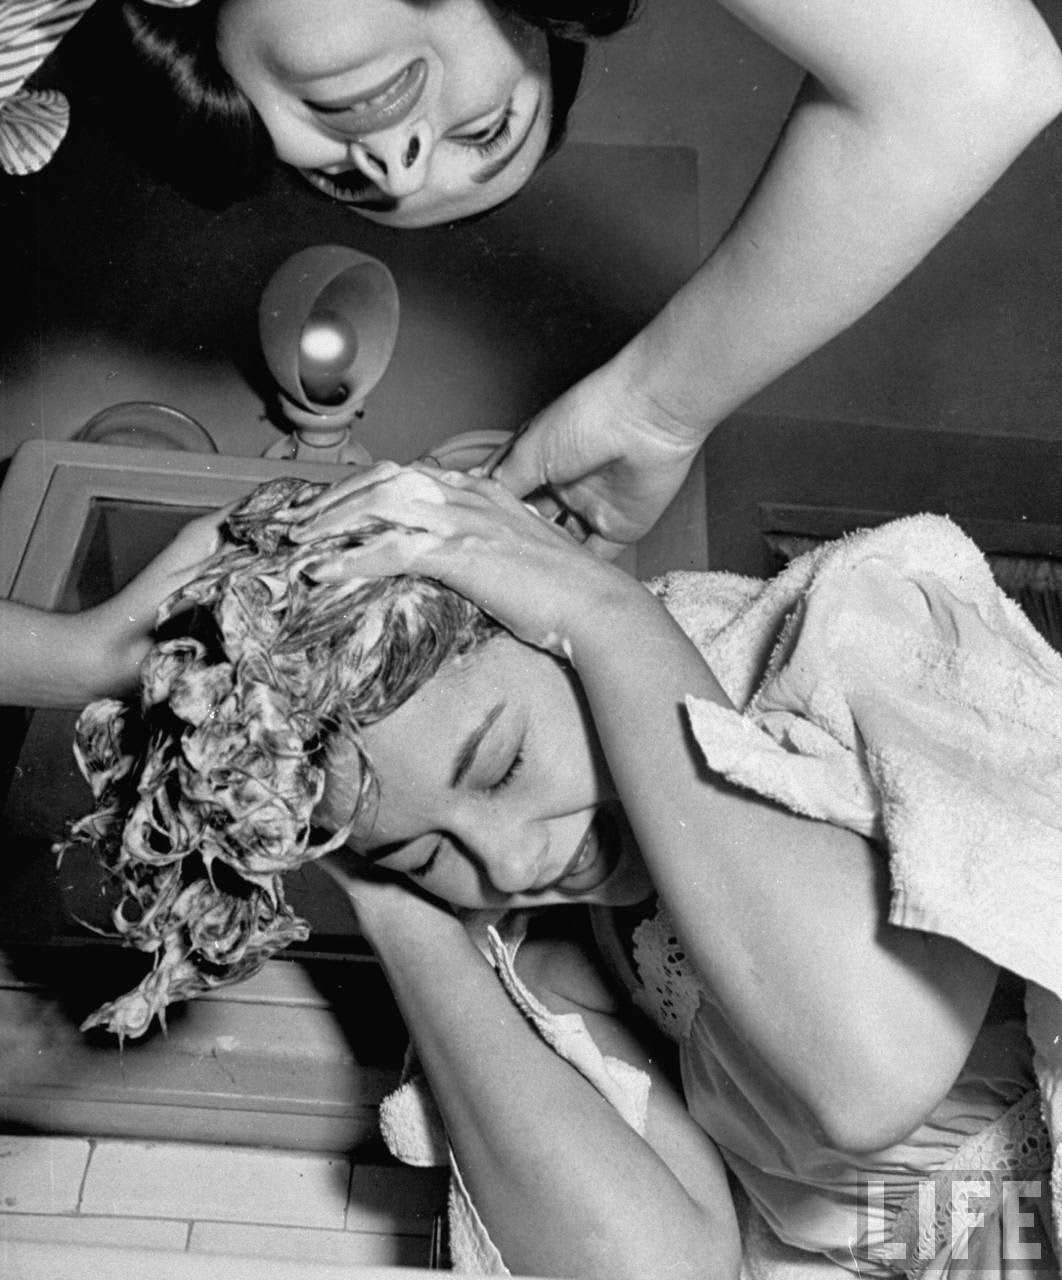 The O'Connor twins Gloria and Consuelo, washing each other's hair, 1947